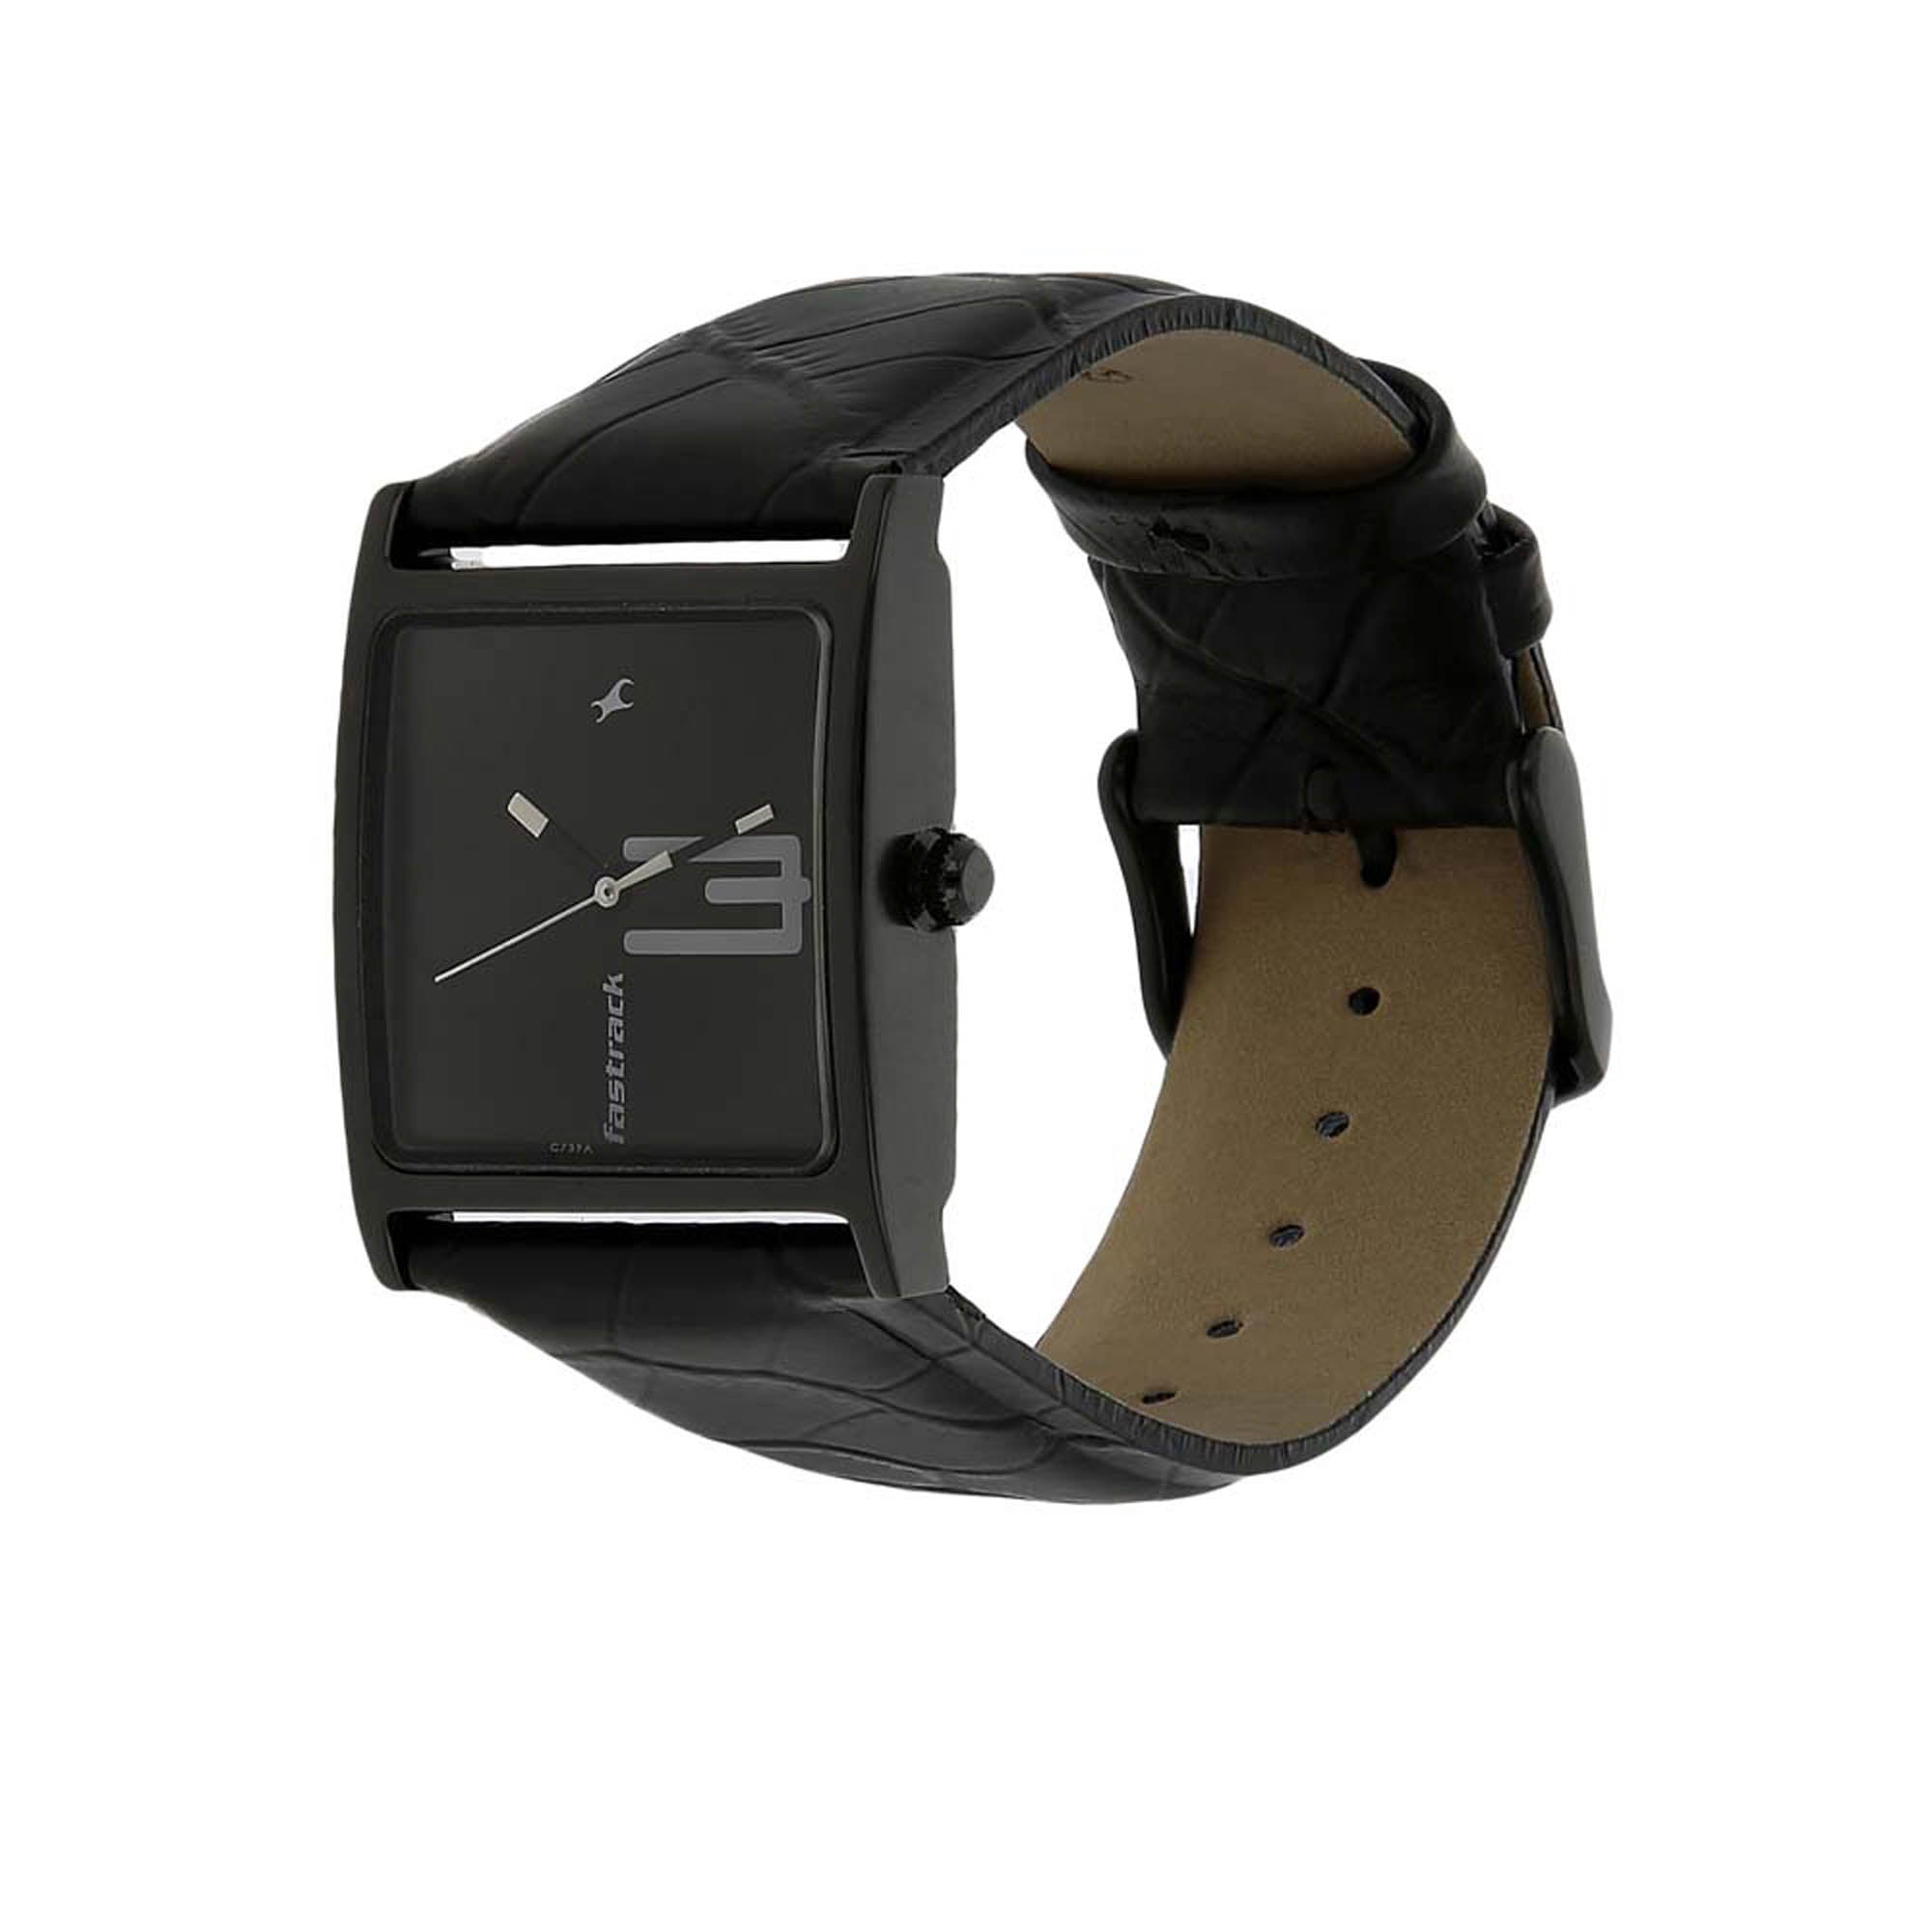 Fastrack Quartz Analog Black Dial Leather Strap Watch for Girls